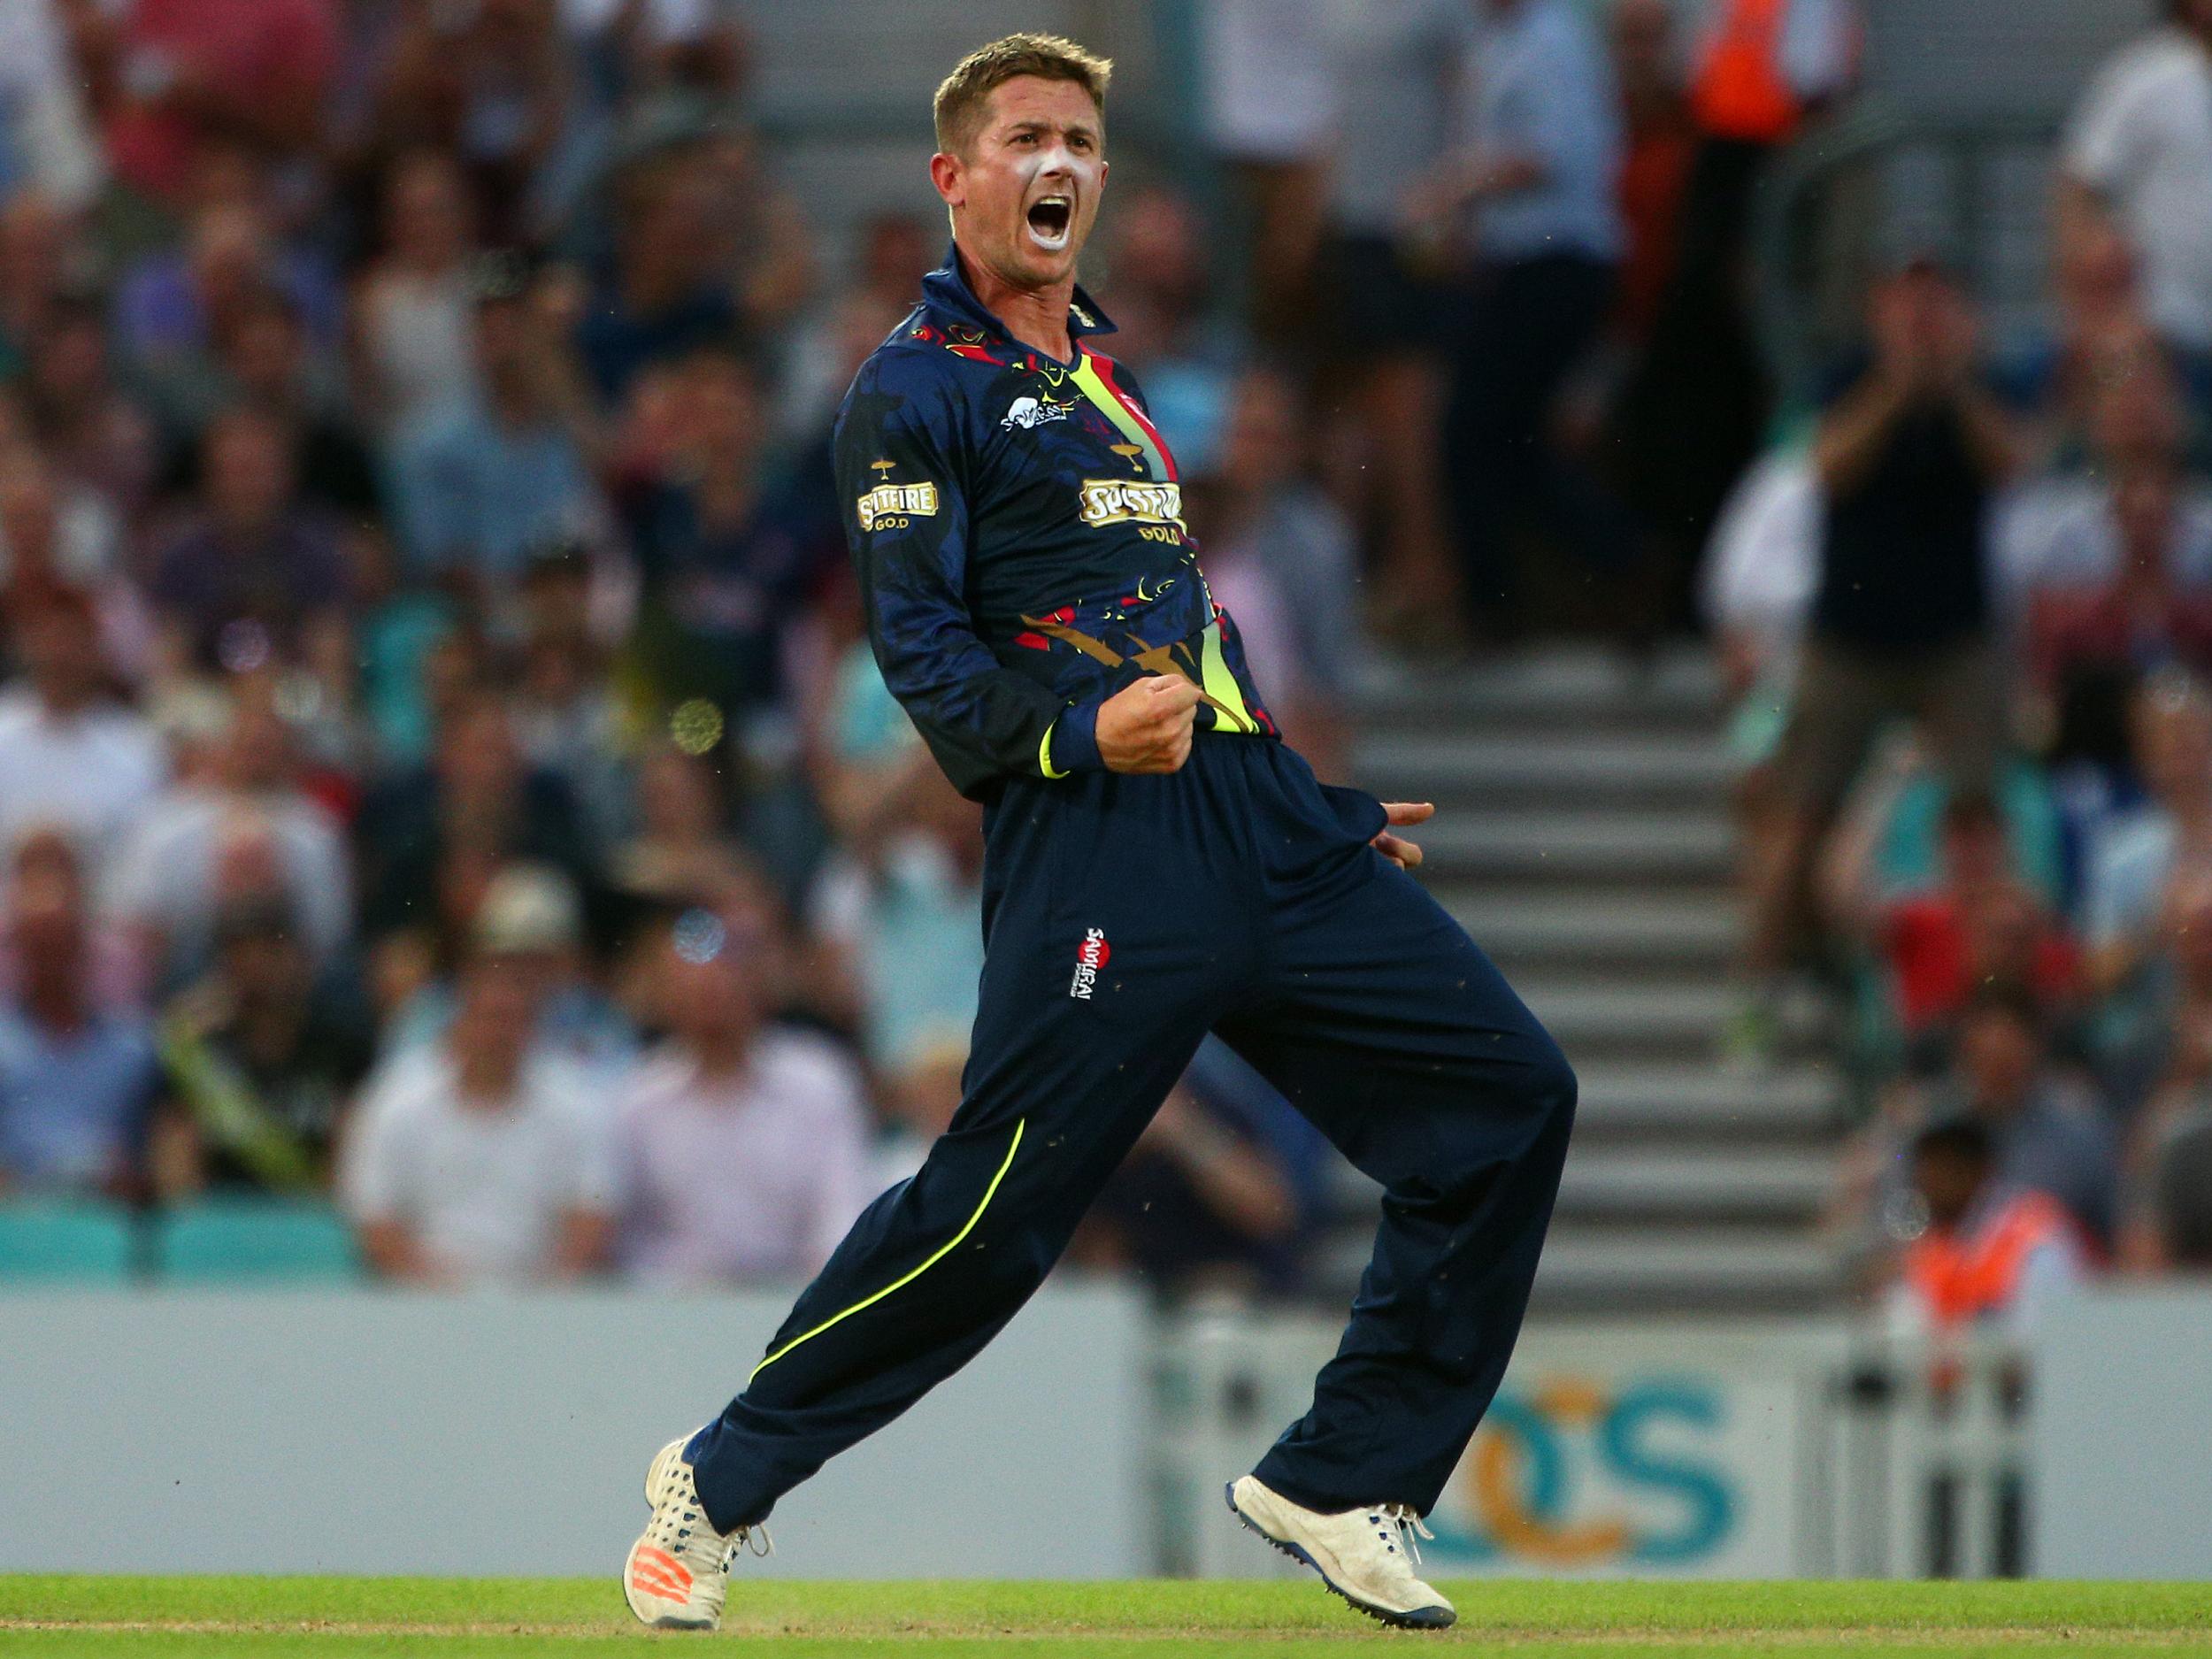 Joe Denly's form in short-ball cricket for Kent sees him rewarded with an England recall